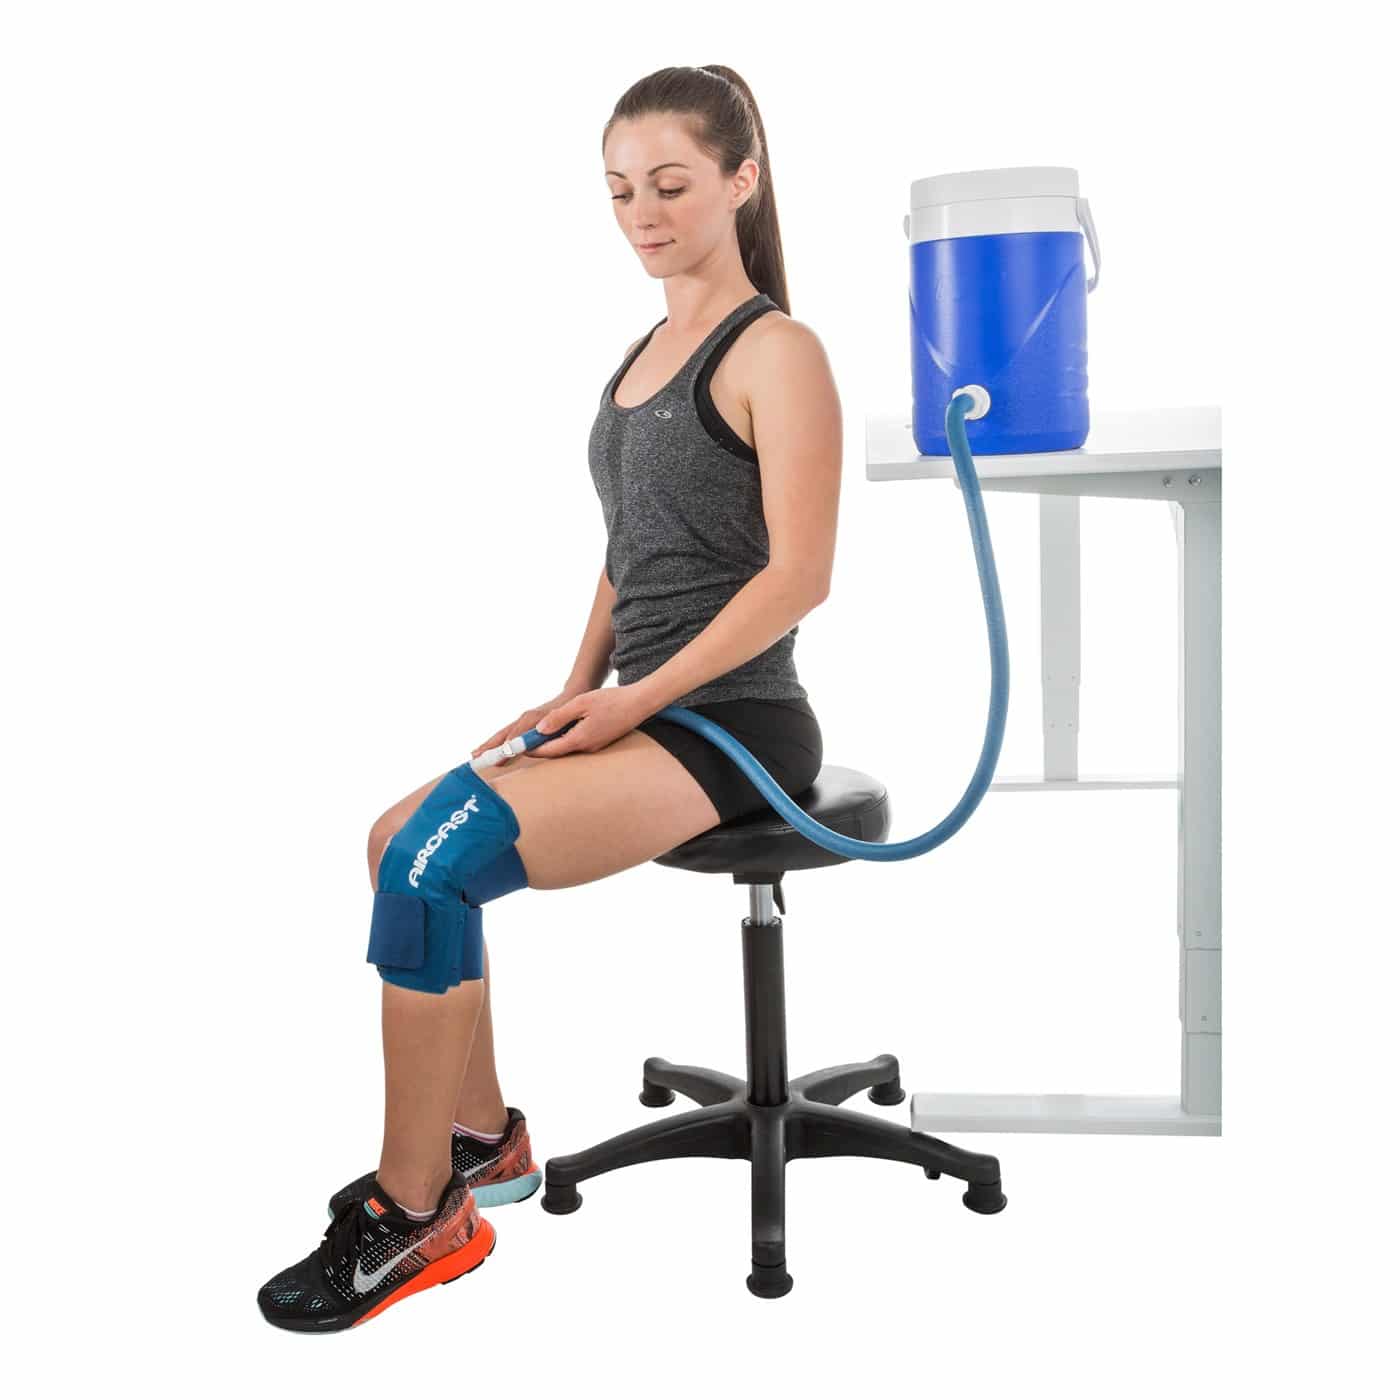 Aircast Knee Cryo/Cuff w/ Gravity Cooler